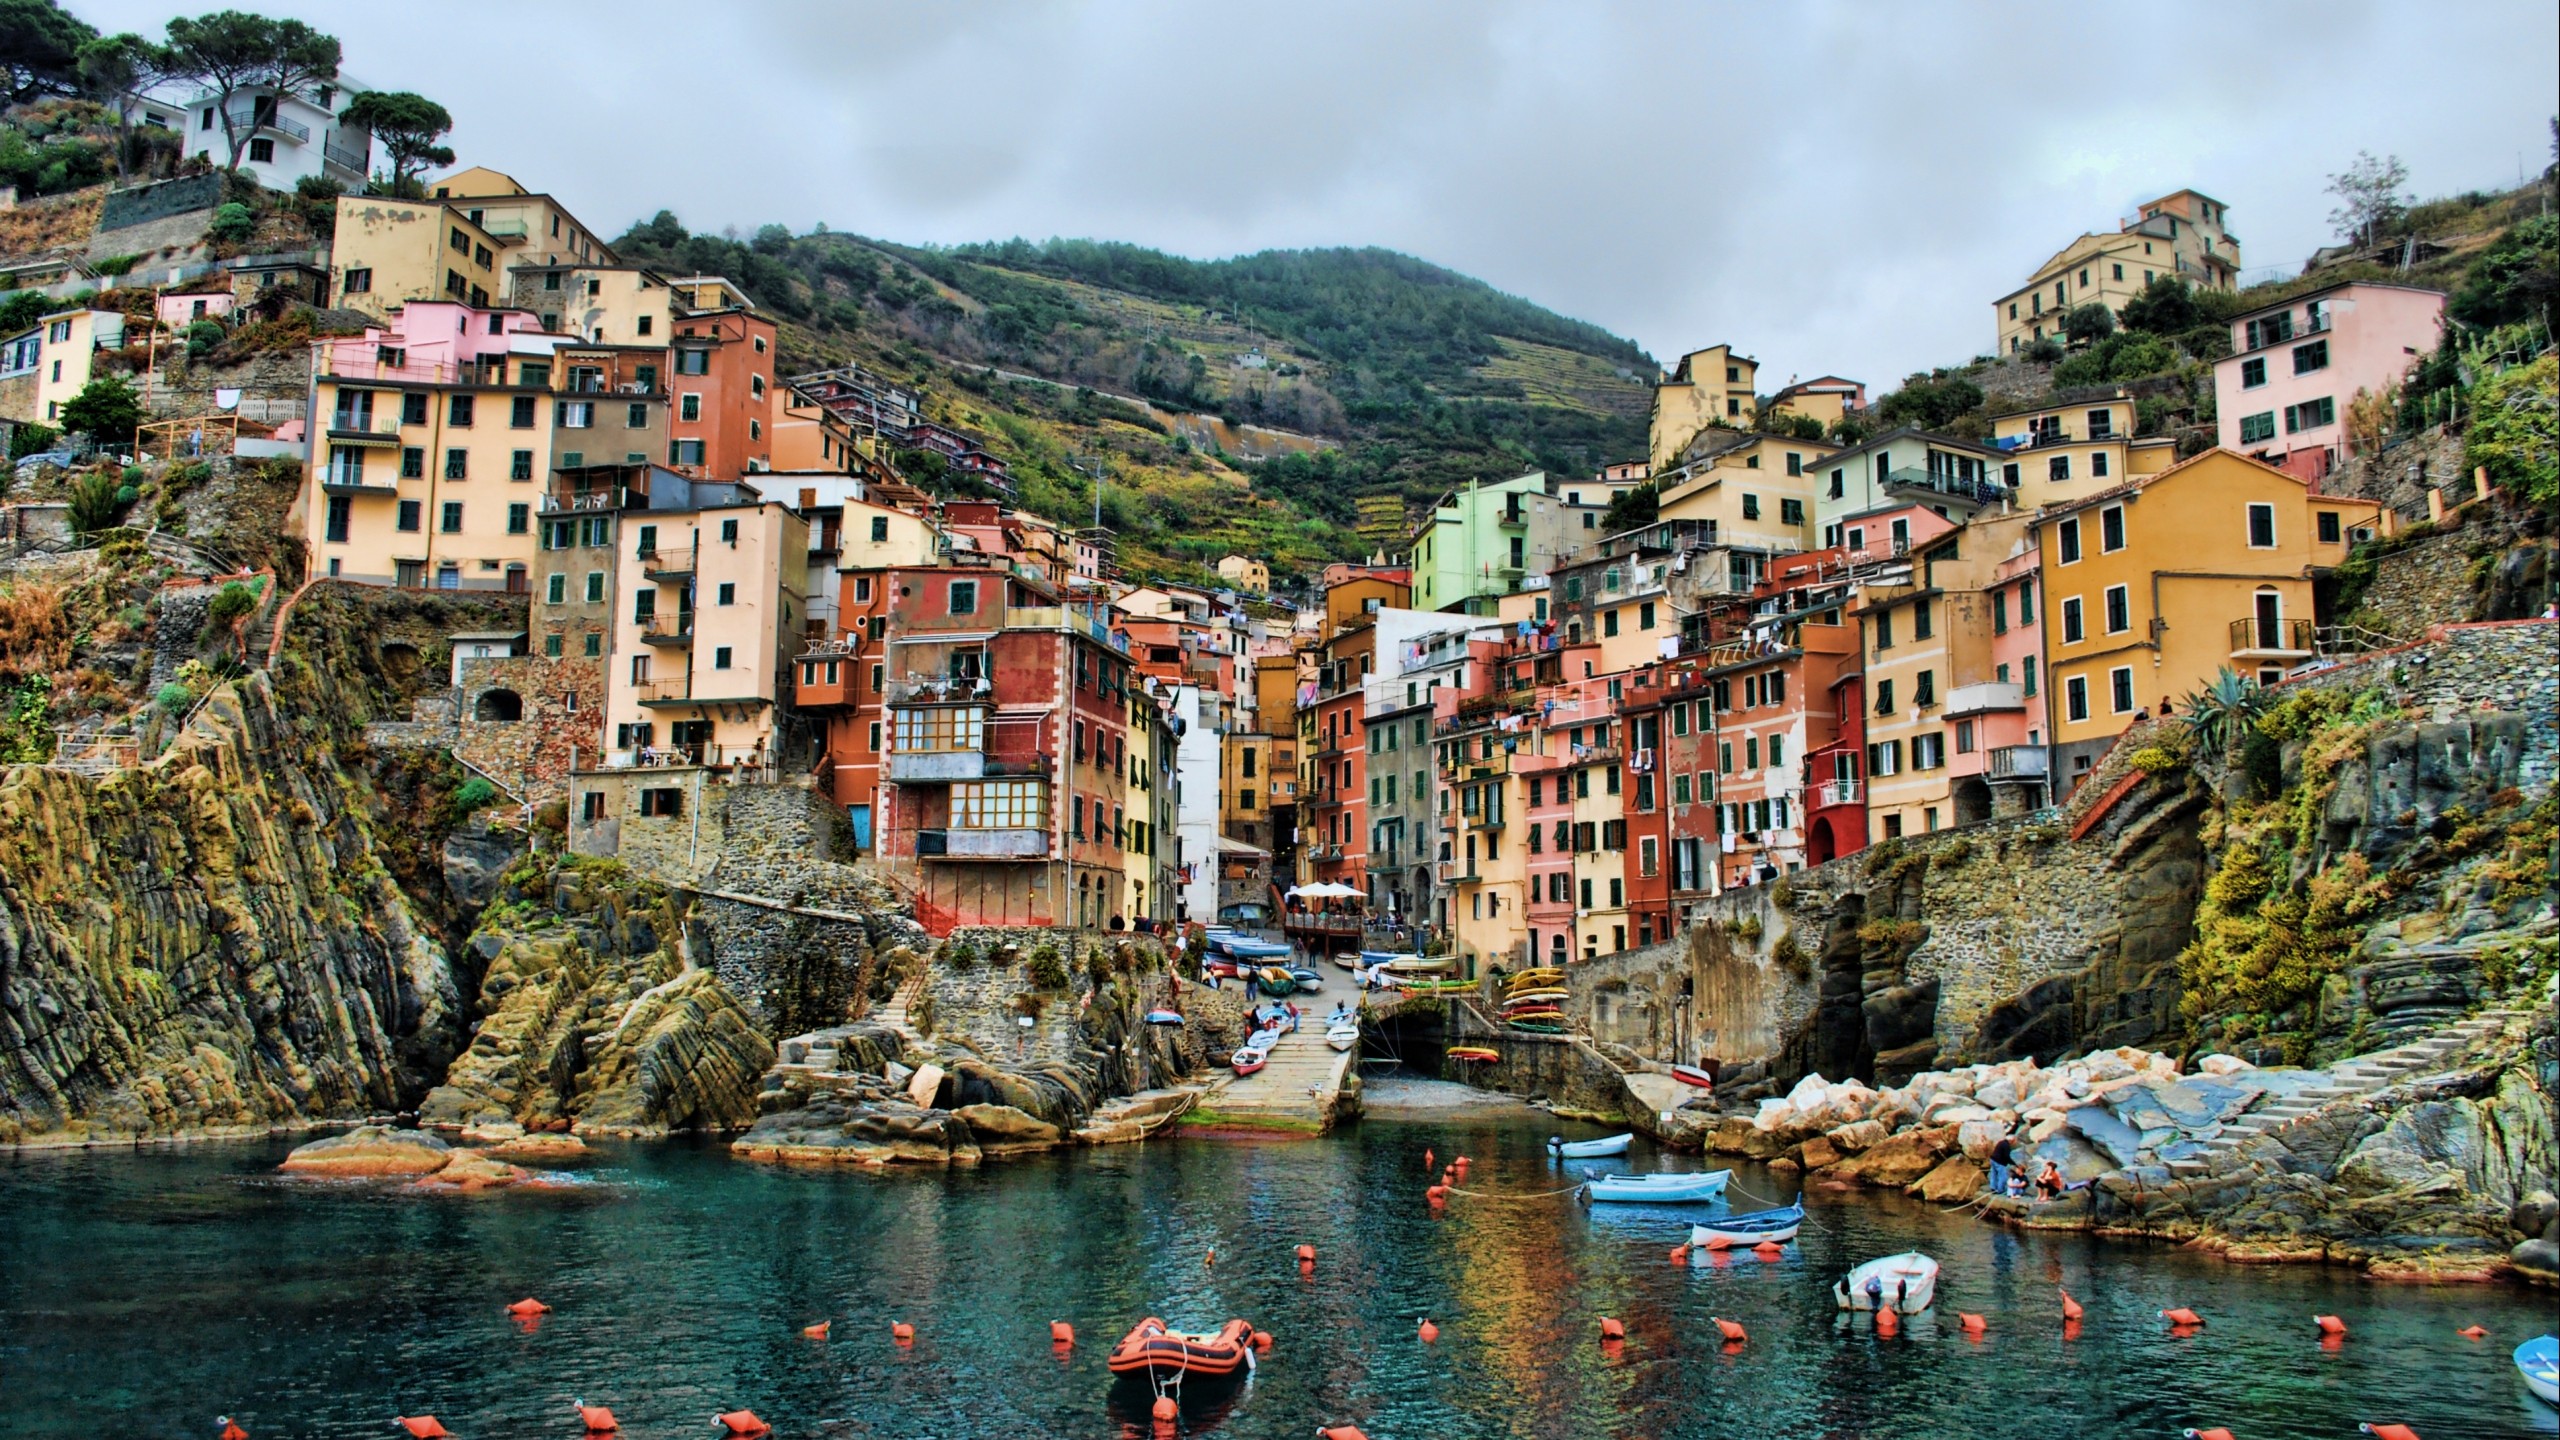 General 2560x1440 house Cinque Terre Italy town